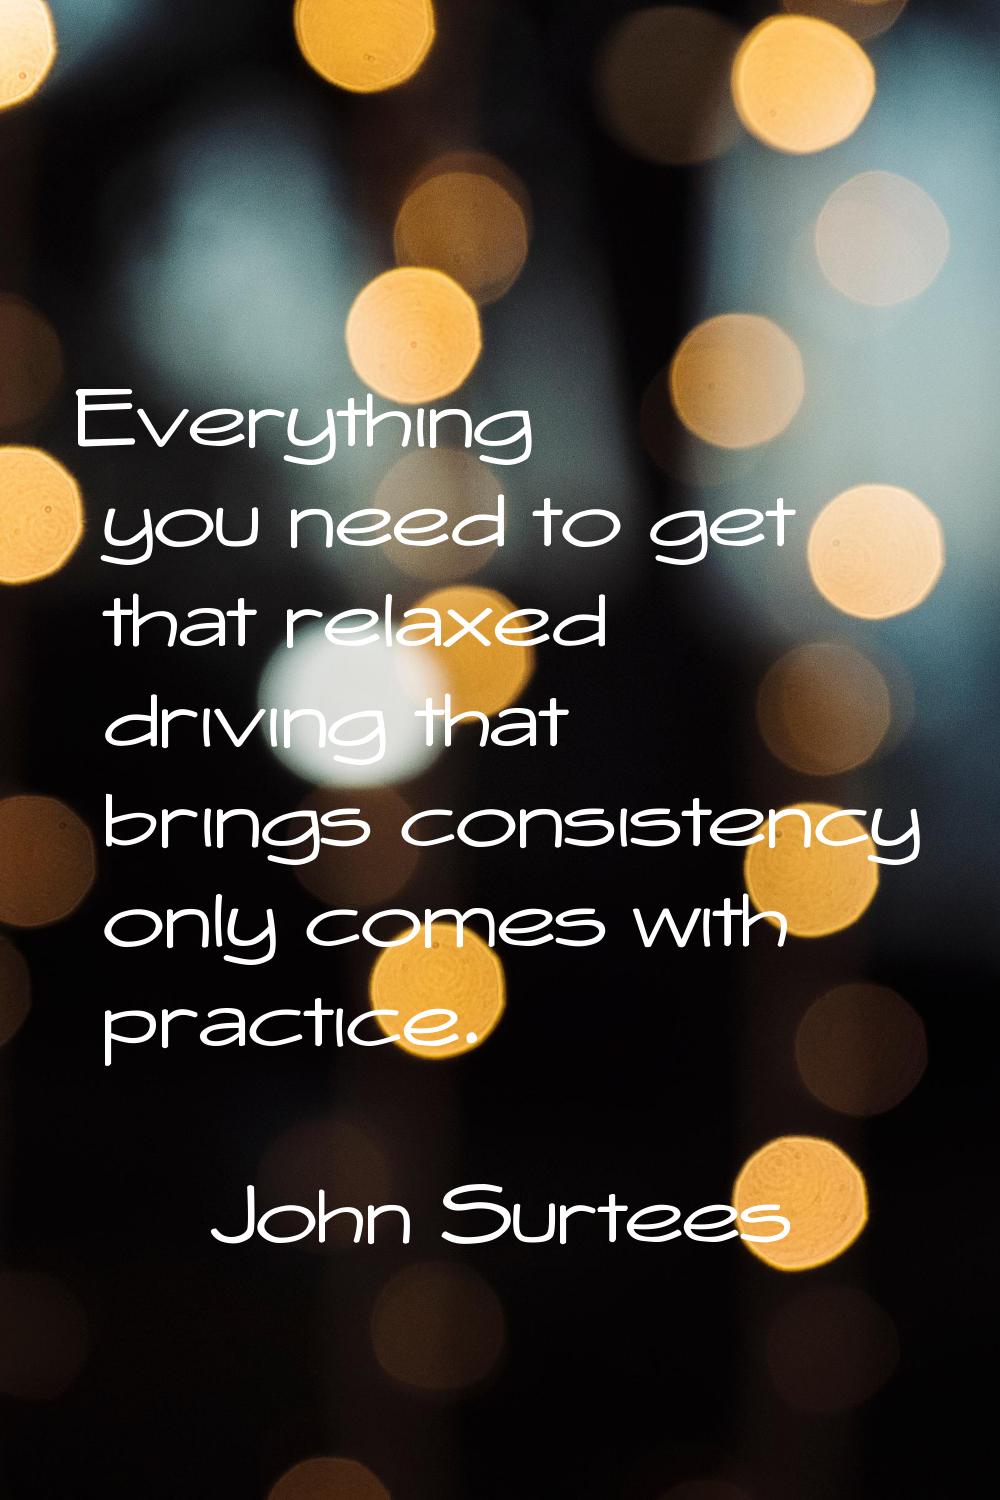 Everything you need to get that relaxed driving that brings consistency only comes with practice.